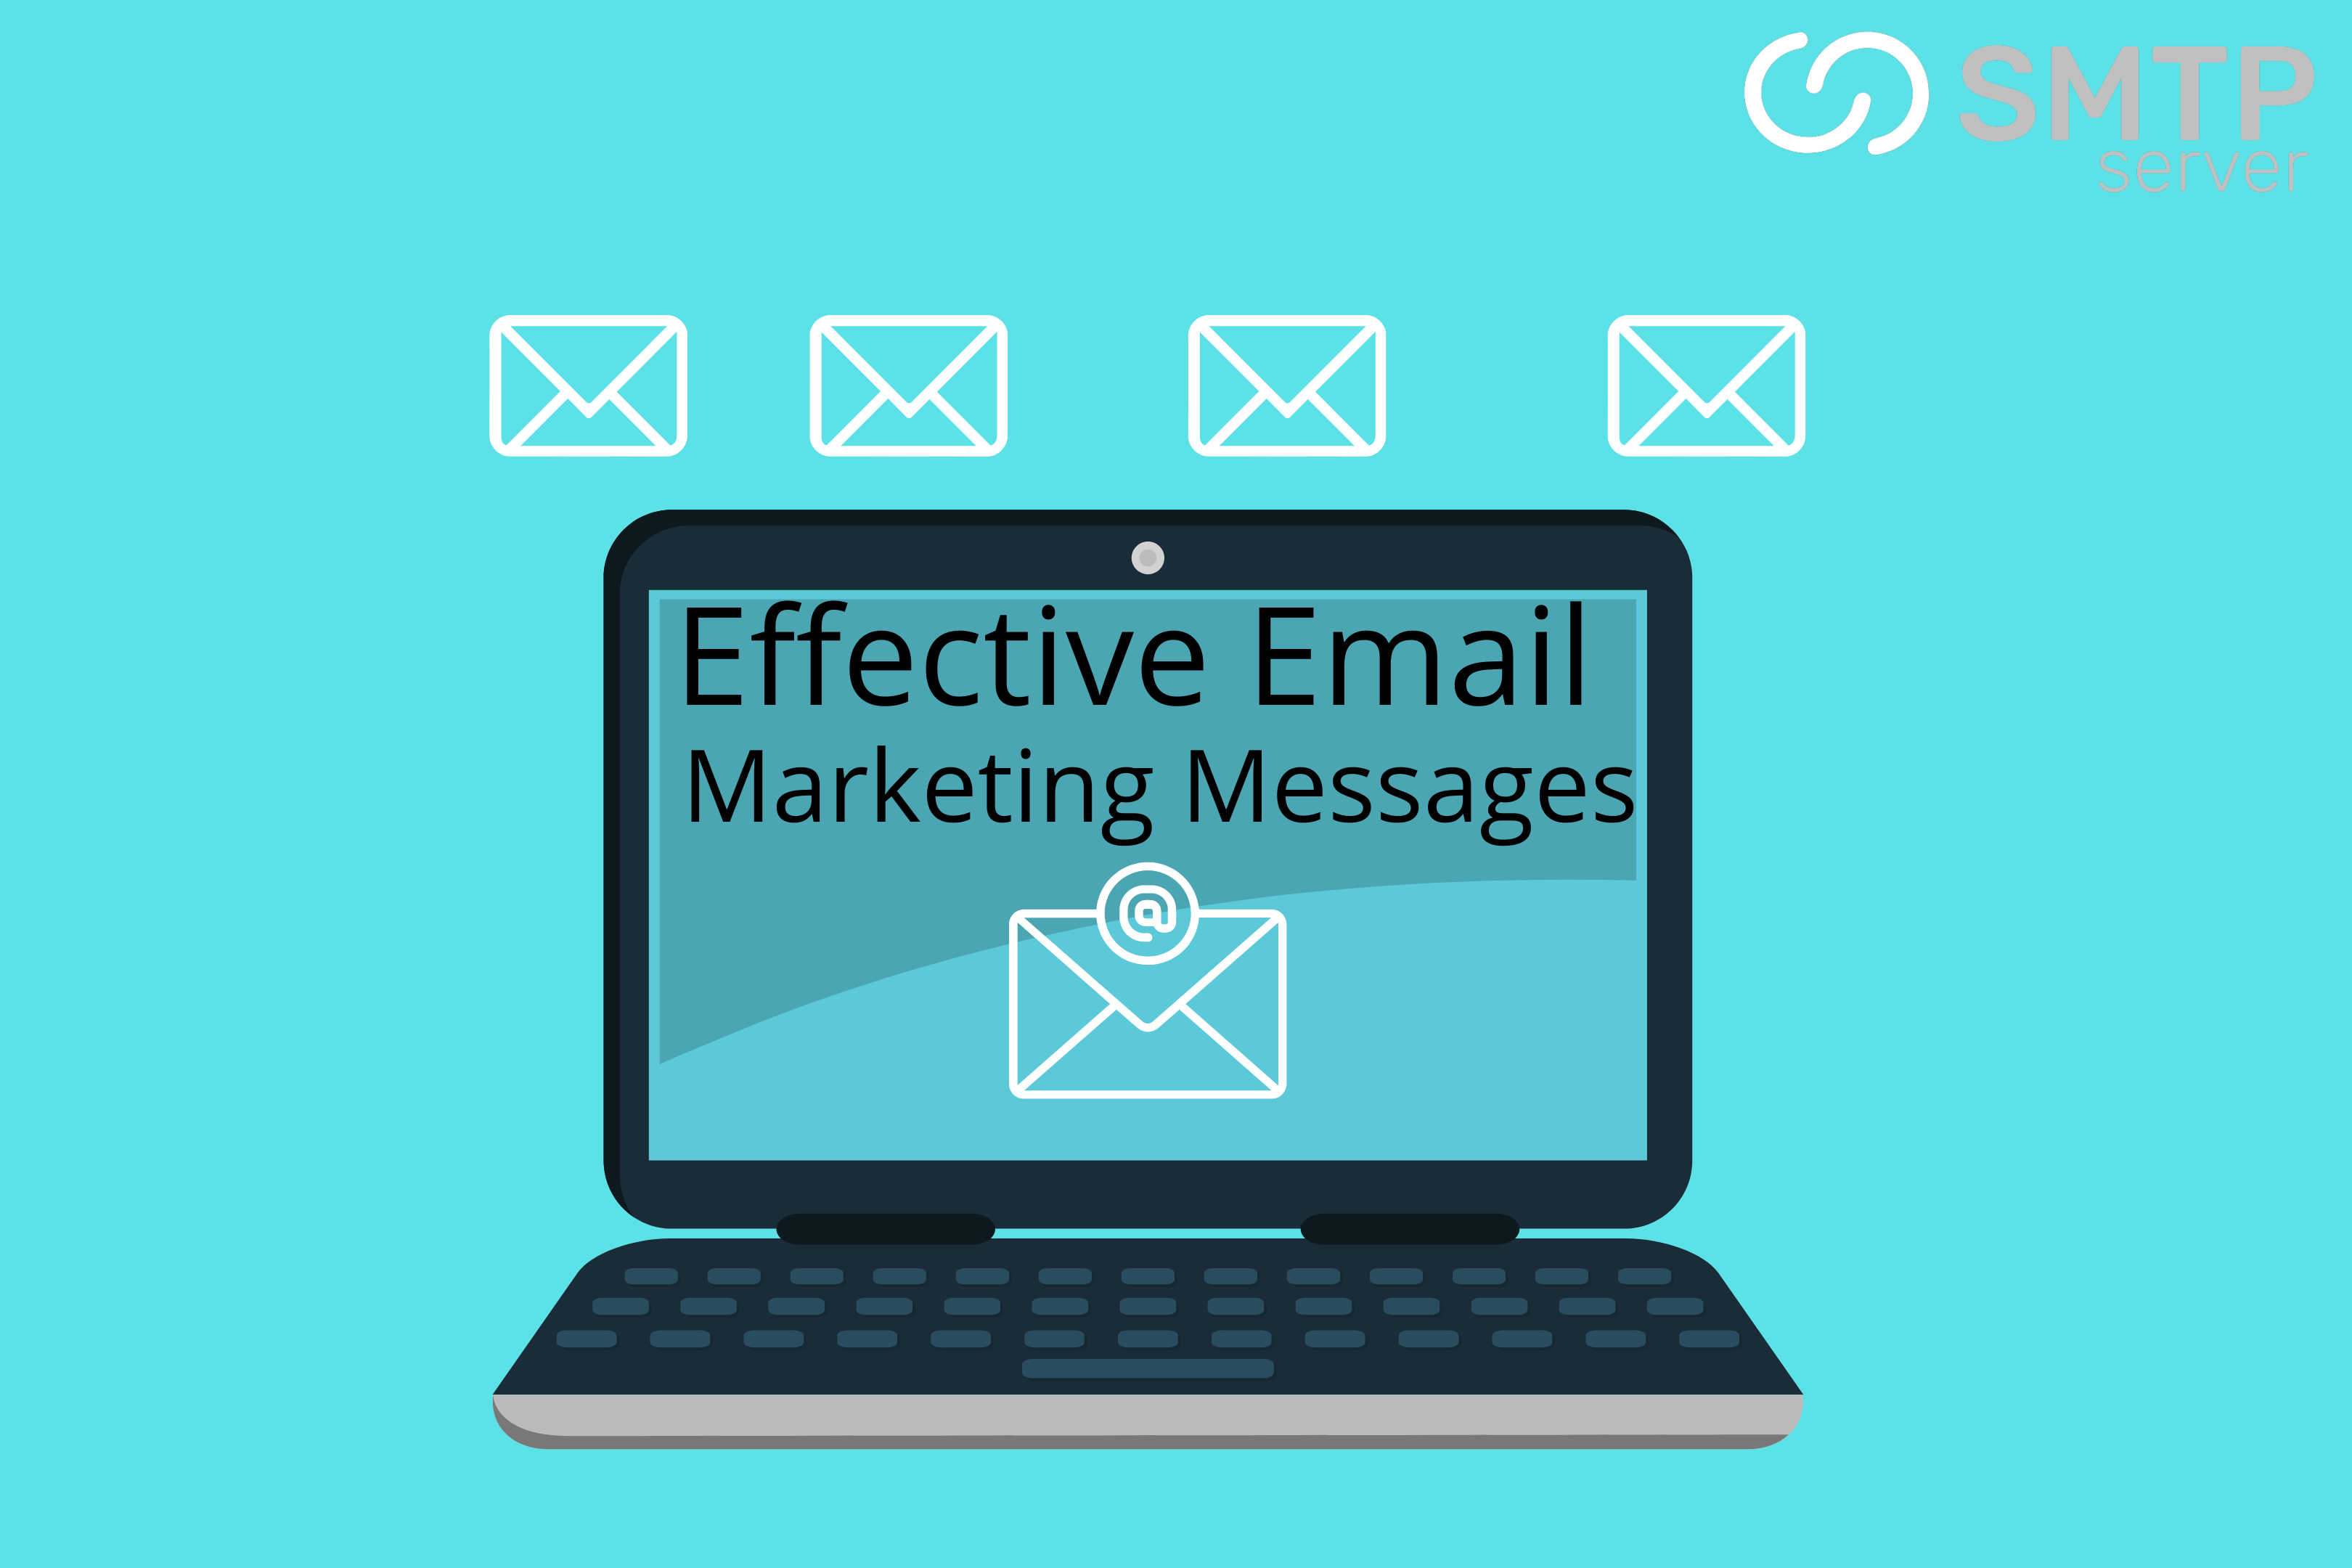 Tips for Creating More Effective Email Marketing Messages